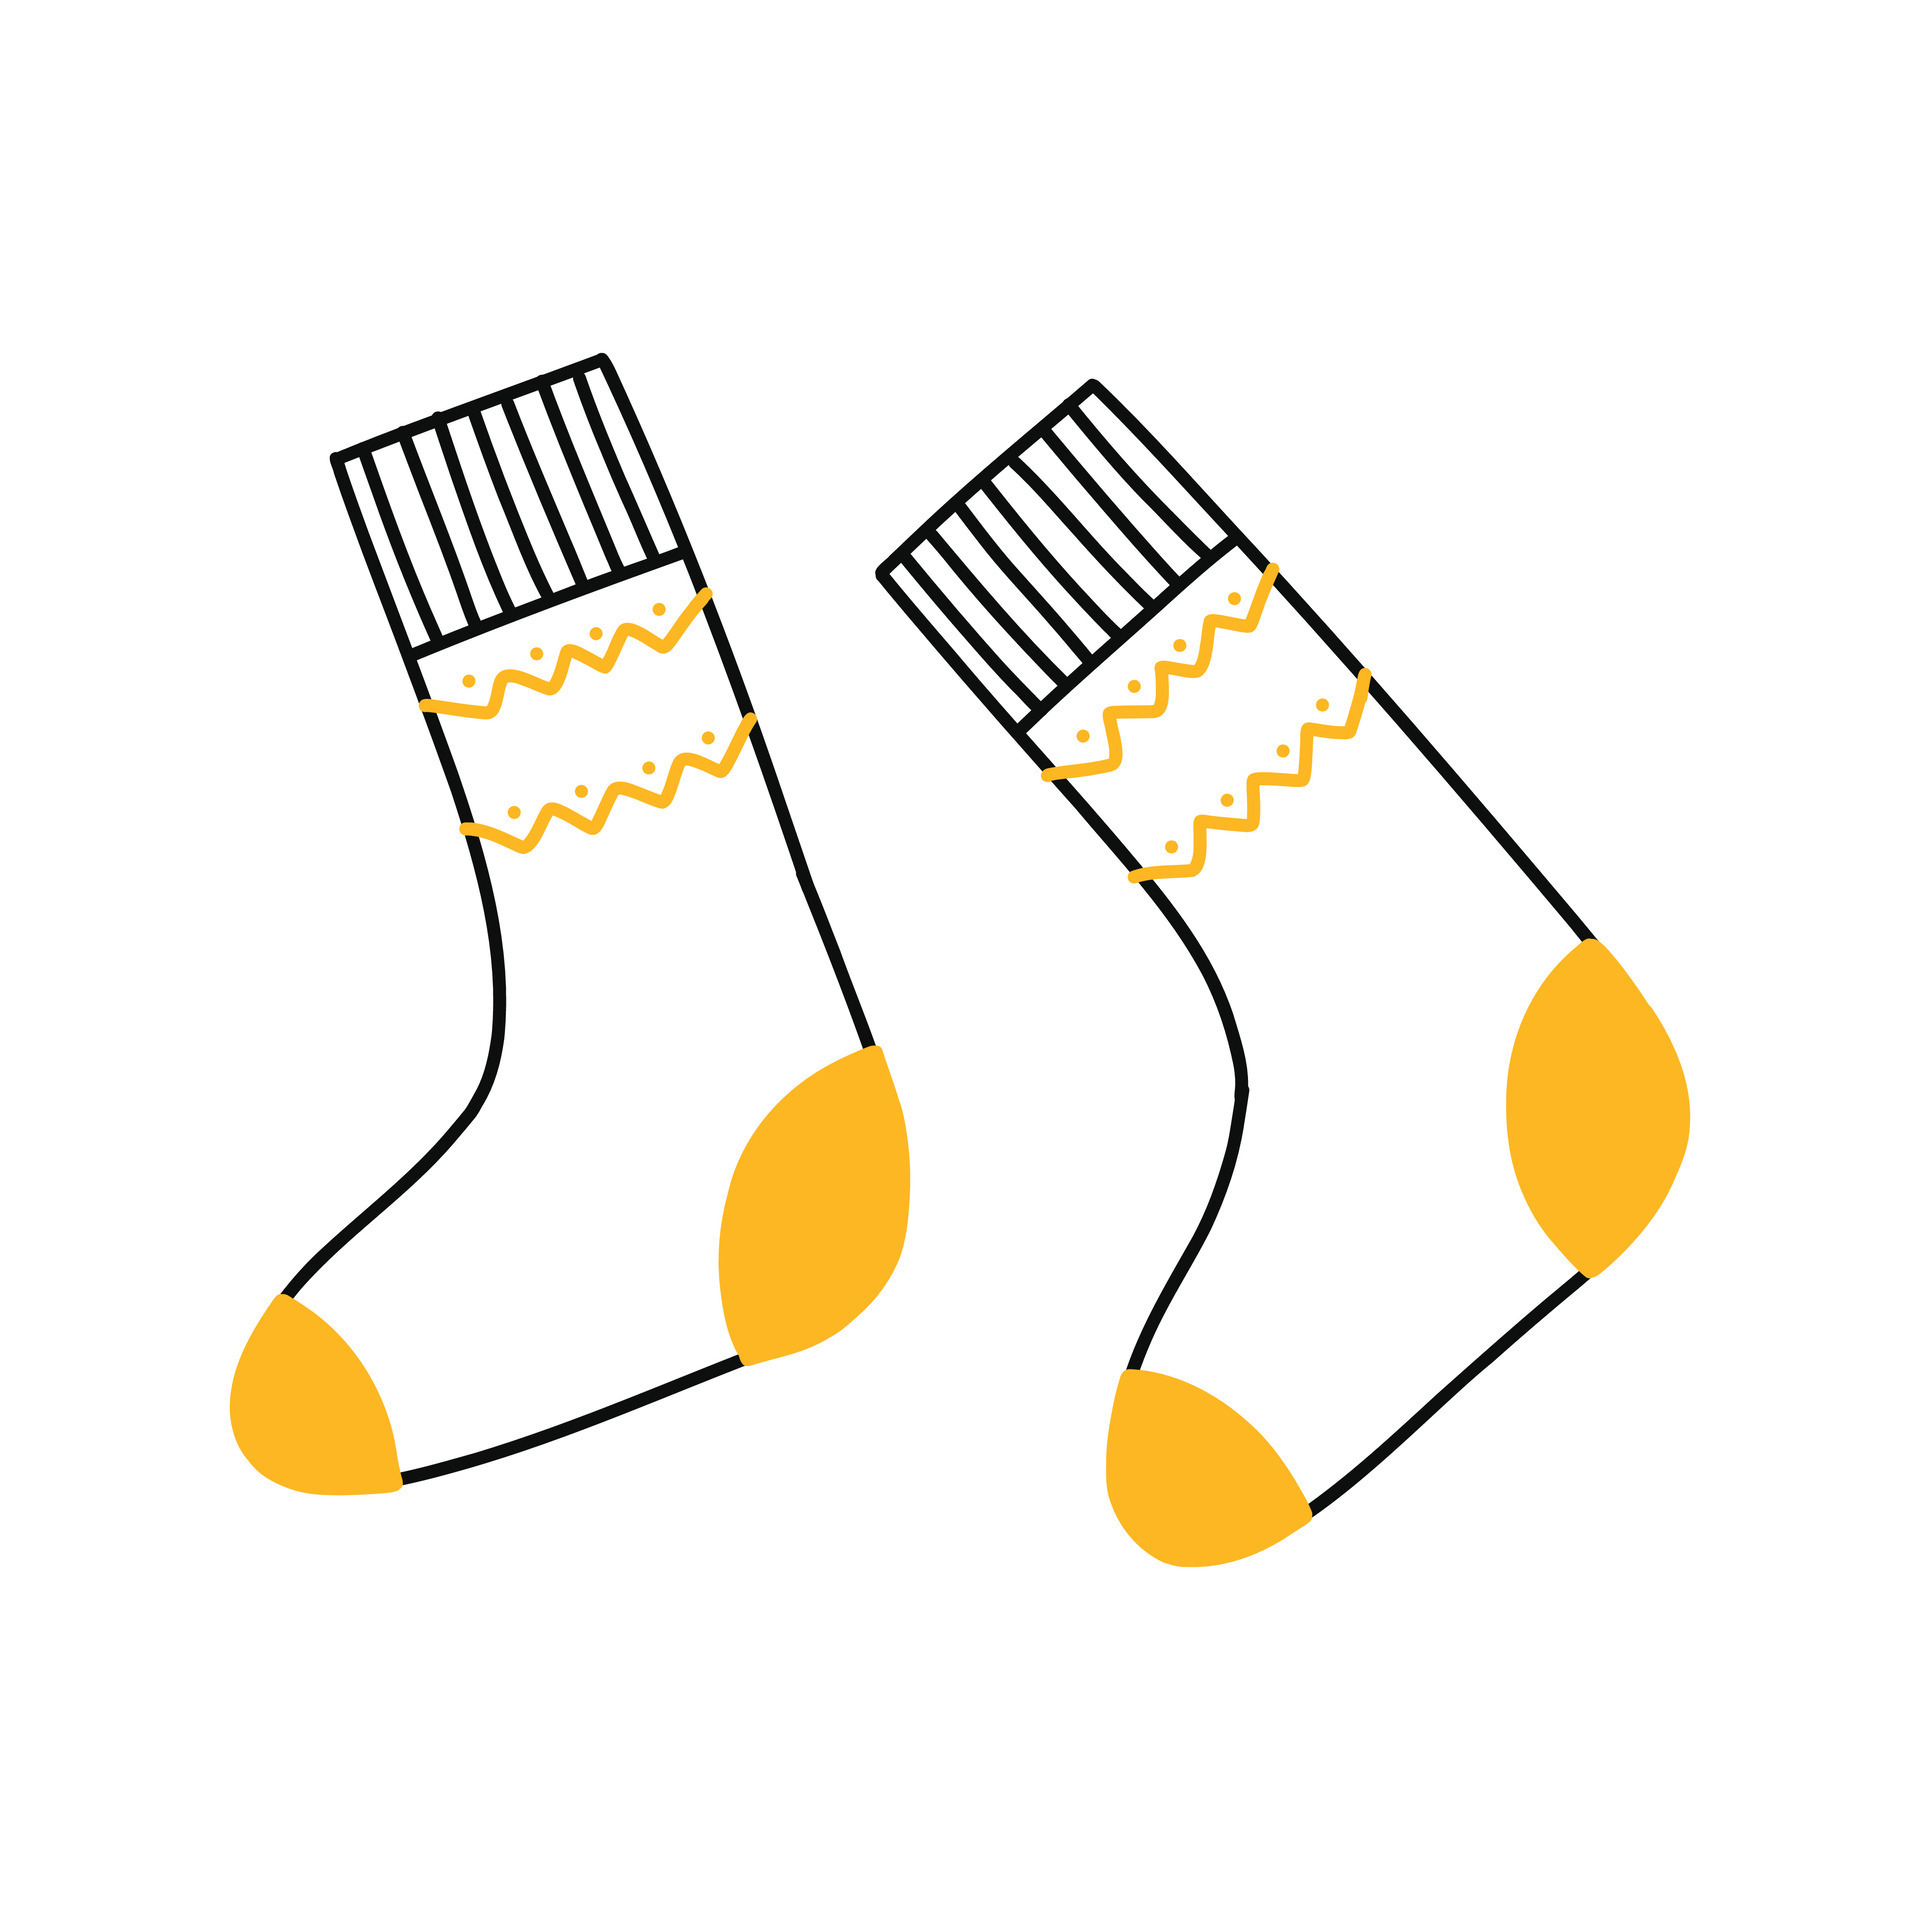 Premium Vector  A pair of cute socks in cartoon style. vector illustration  isolated on white background.